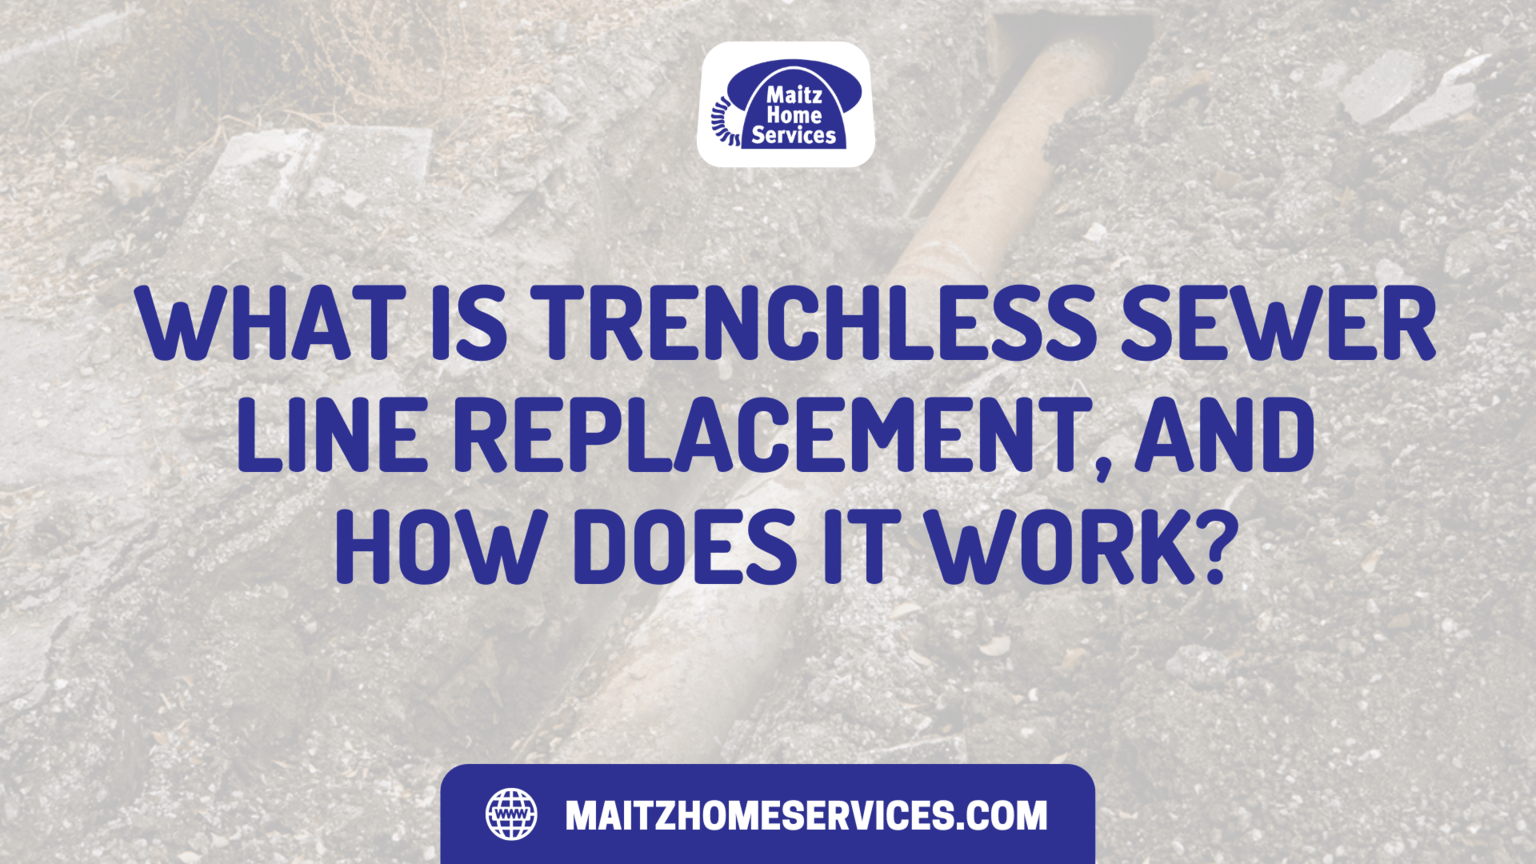 What Is Trenchless Sewer Line Replacement, and How Does It Work?